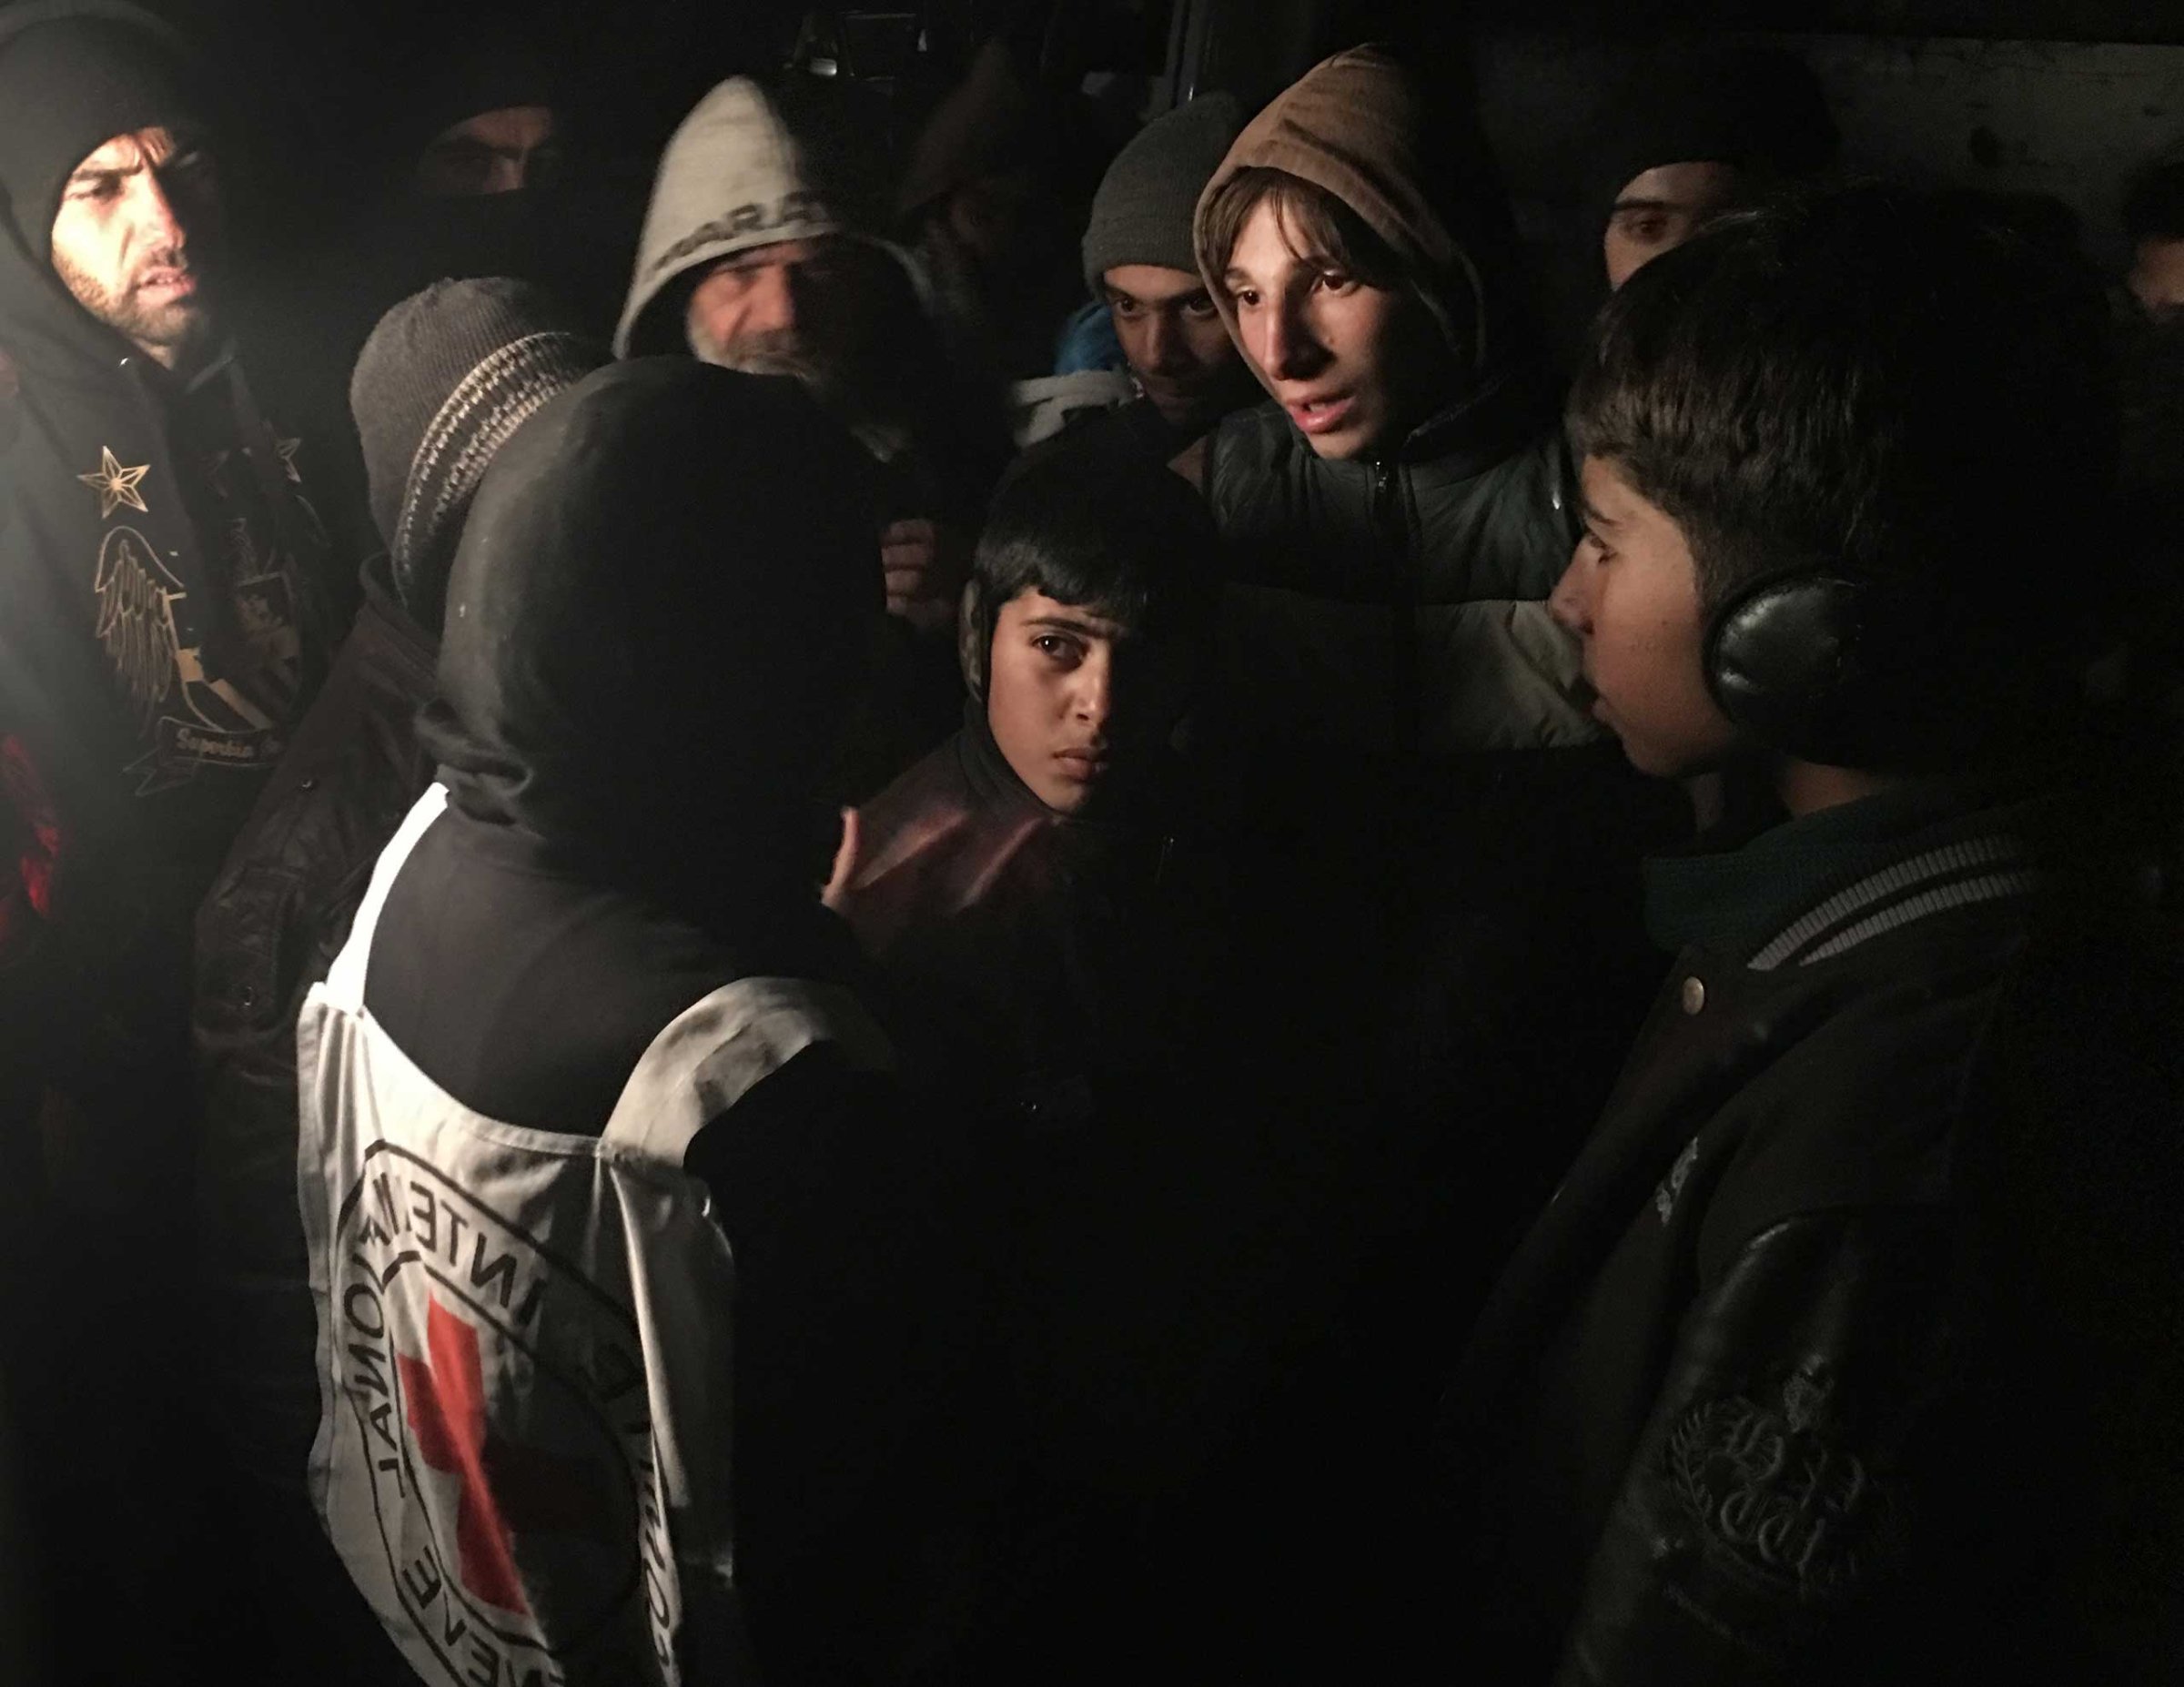 ICRC Head of Delegation Marianne Gasser speaks to residents of Madaya, a besieged town in Syria, as they gather around an aid convoy, Jan. 11, 2016. The International Committee of the Red Cross, working alongside the Syrian Arab Red Crescent and United Nations, began to deliver aid to thousands of people living in three besieged areas in Syria.